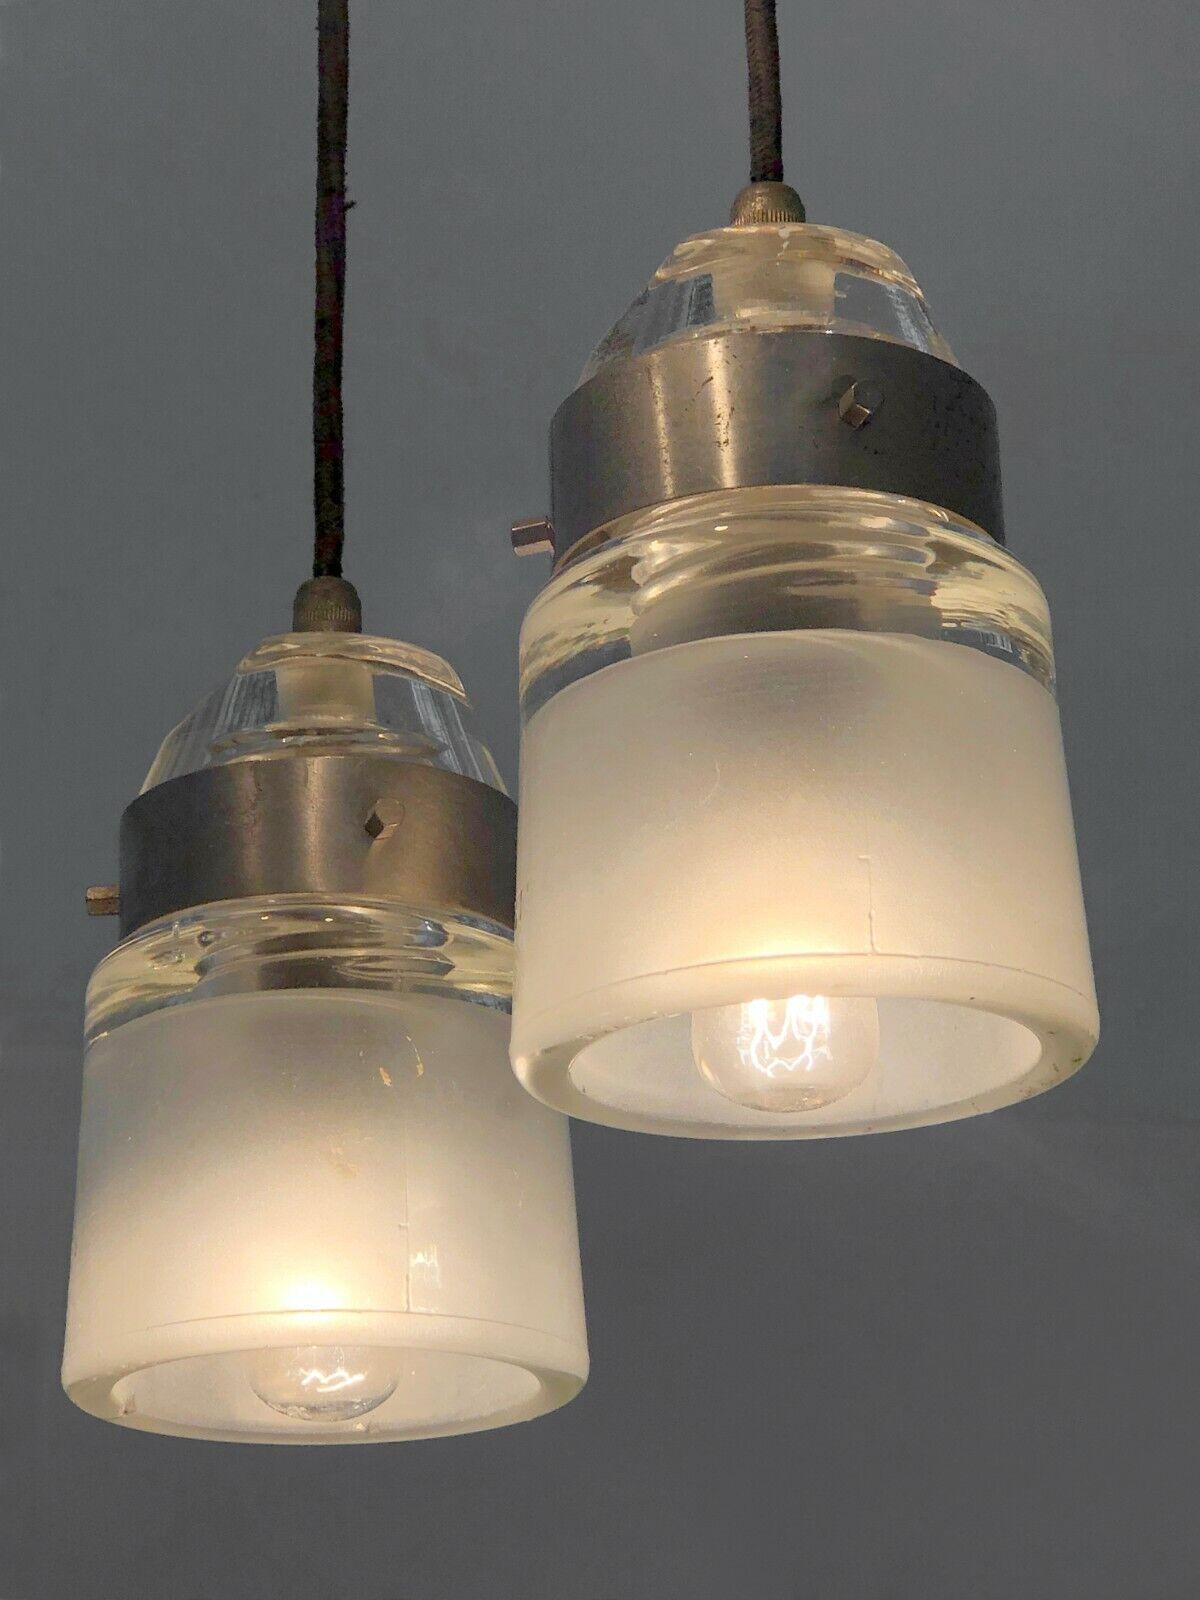 Italian A 5-Lights CEILING FIXTURE, in the style of JOE COLOMBO & O-LUCE, Italy 1960